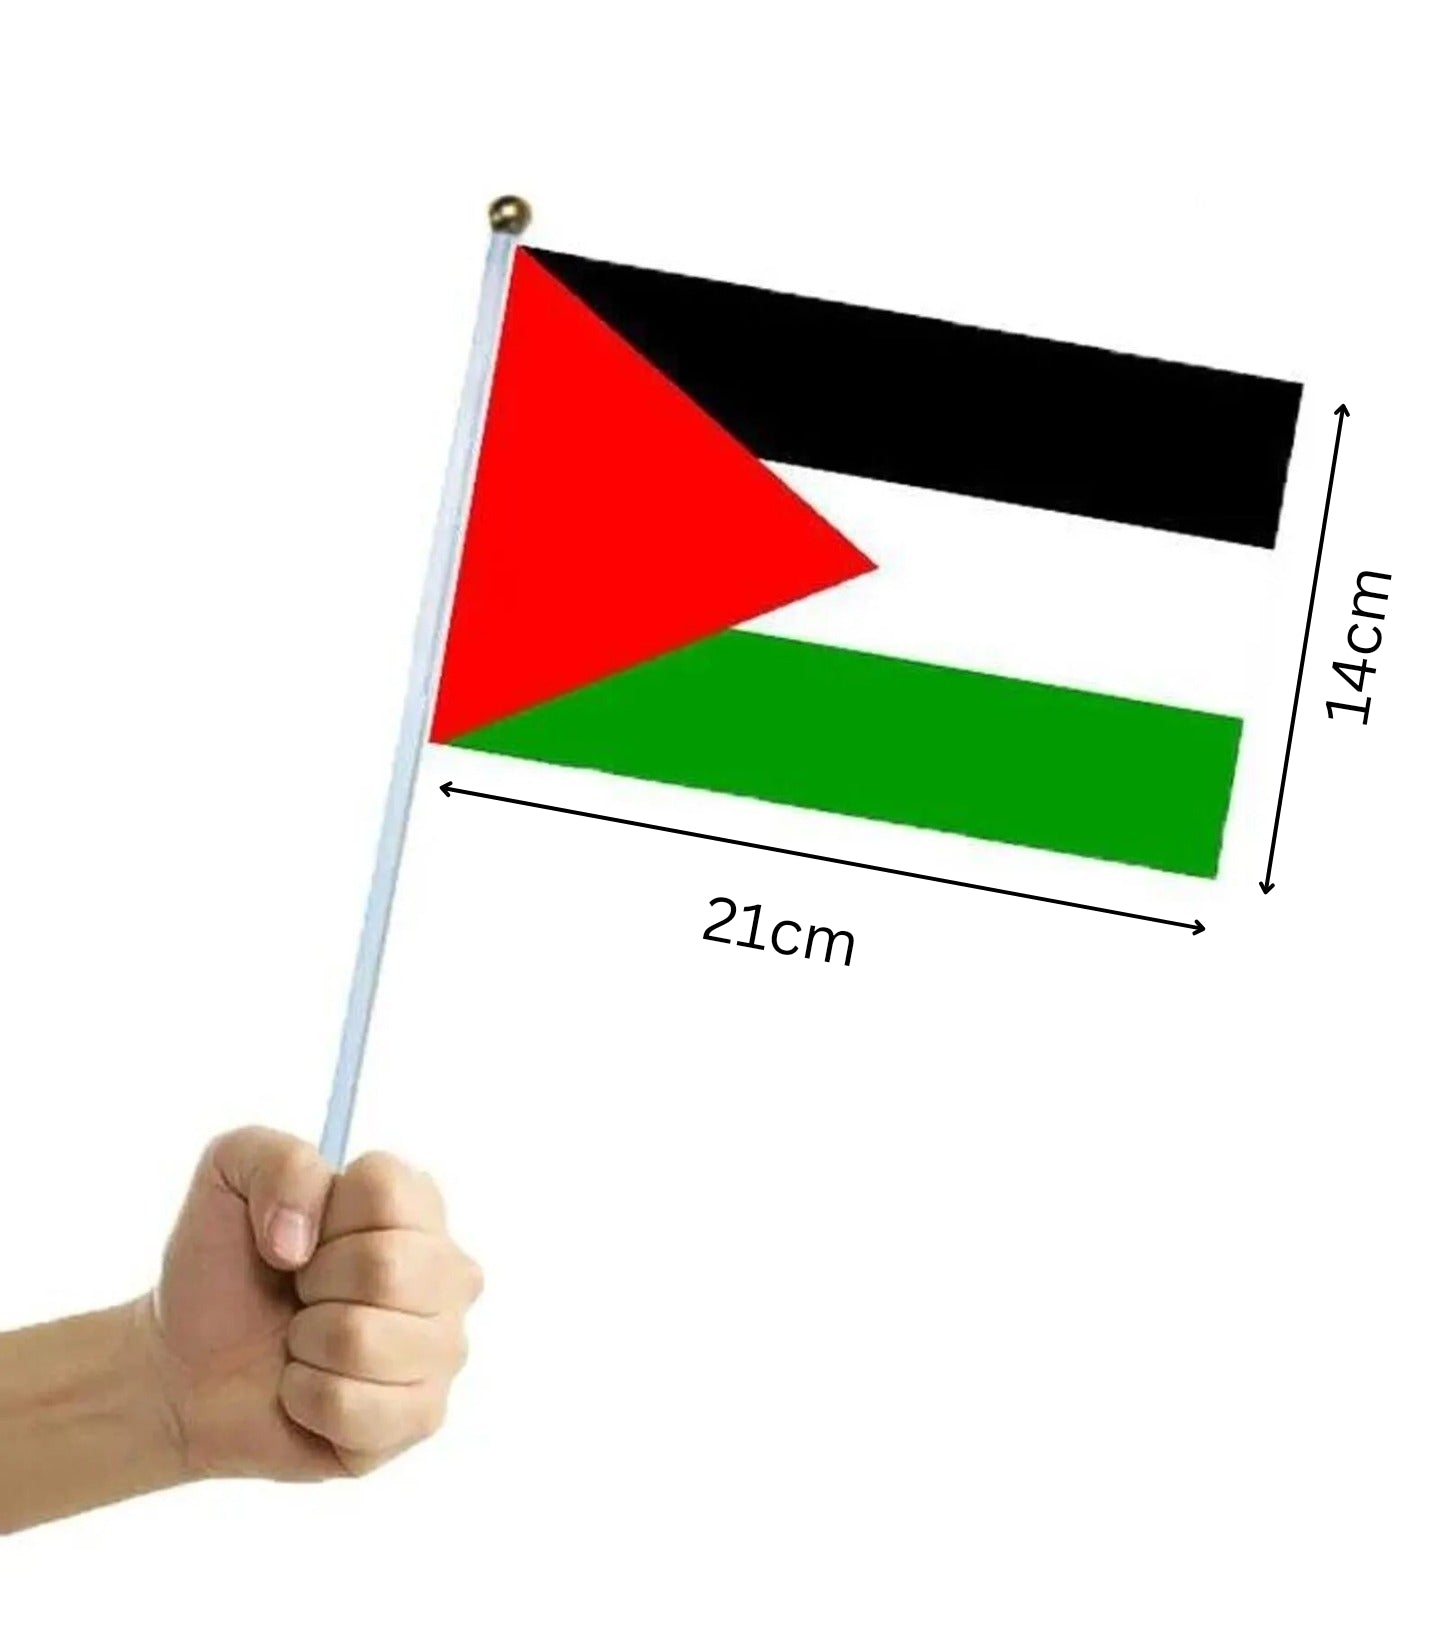 Carry the spirit of Palestine with you wherever you go with our handheld Palestine Flag from Hikmah Boutique. Compact at 21cm by 14cm, this authentic flag is a portable symbol of heritage and unity. Show your support and make a statement—order yours now!